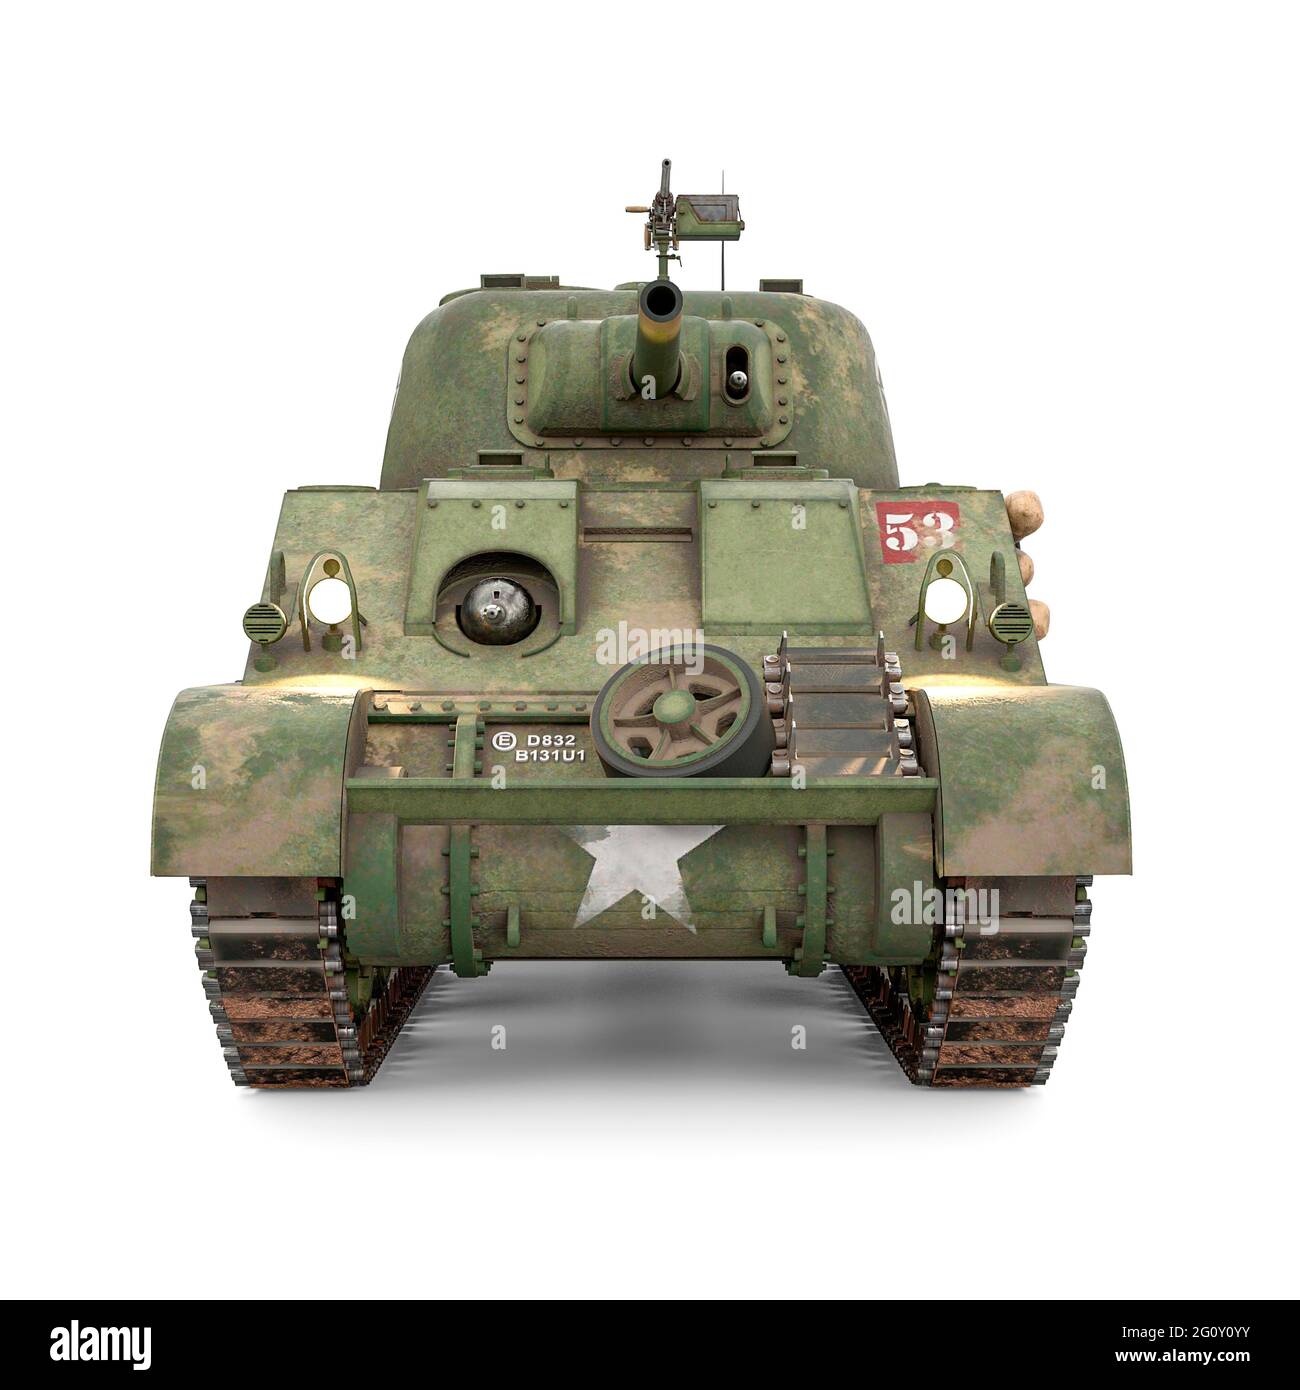 9,126 Army Tank Front On Images, Stock Photos, 3D objects, & Vectors